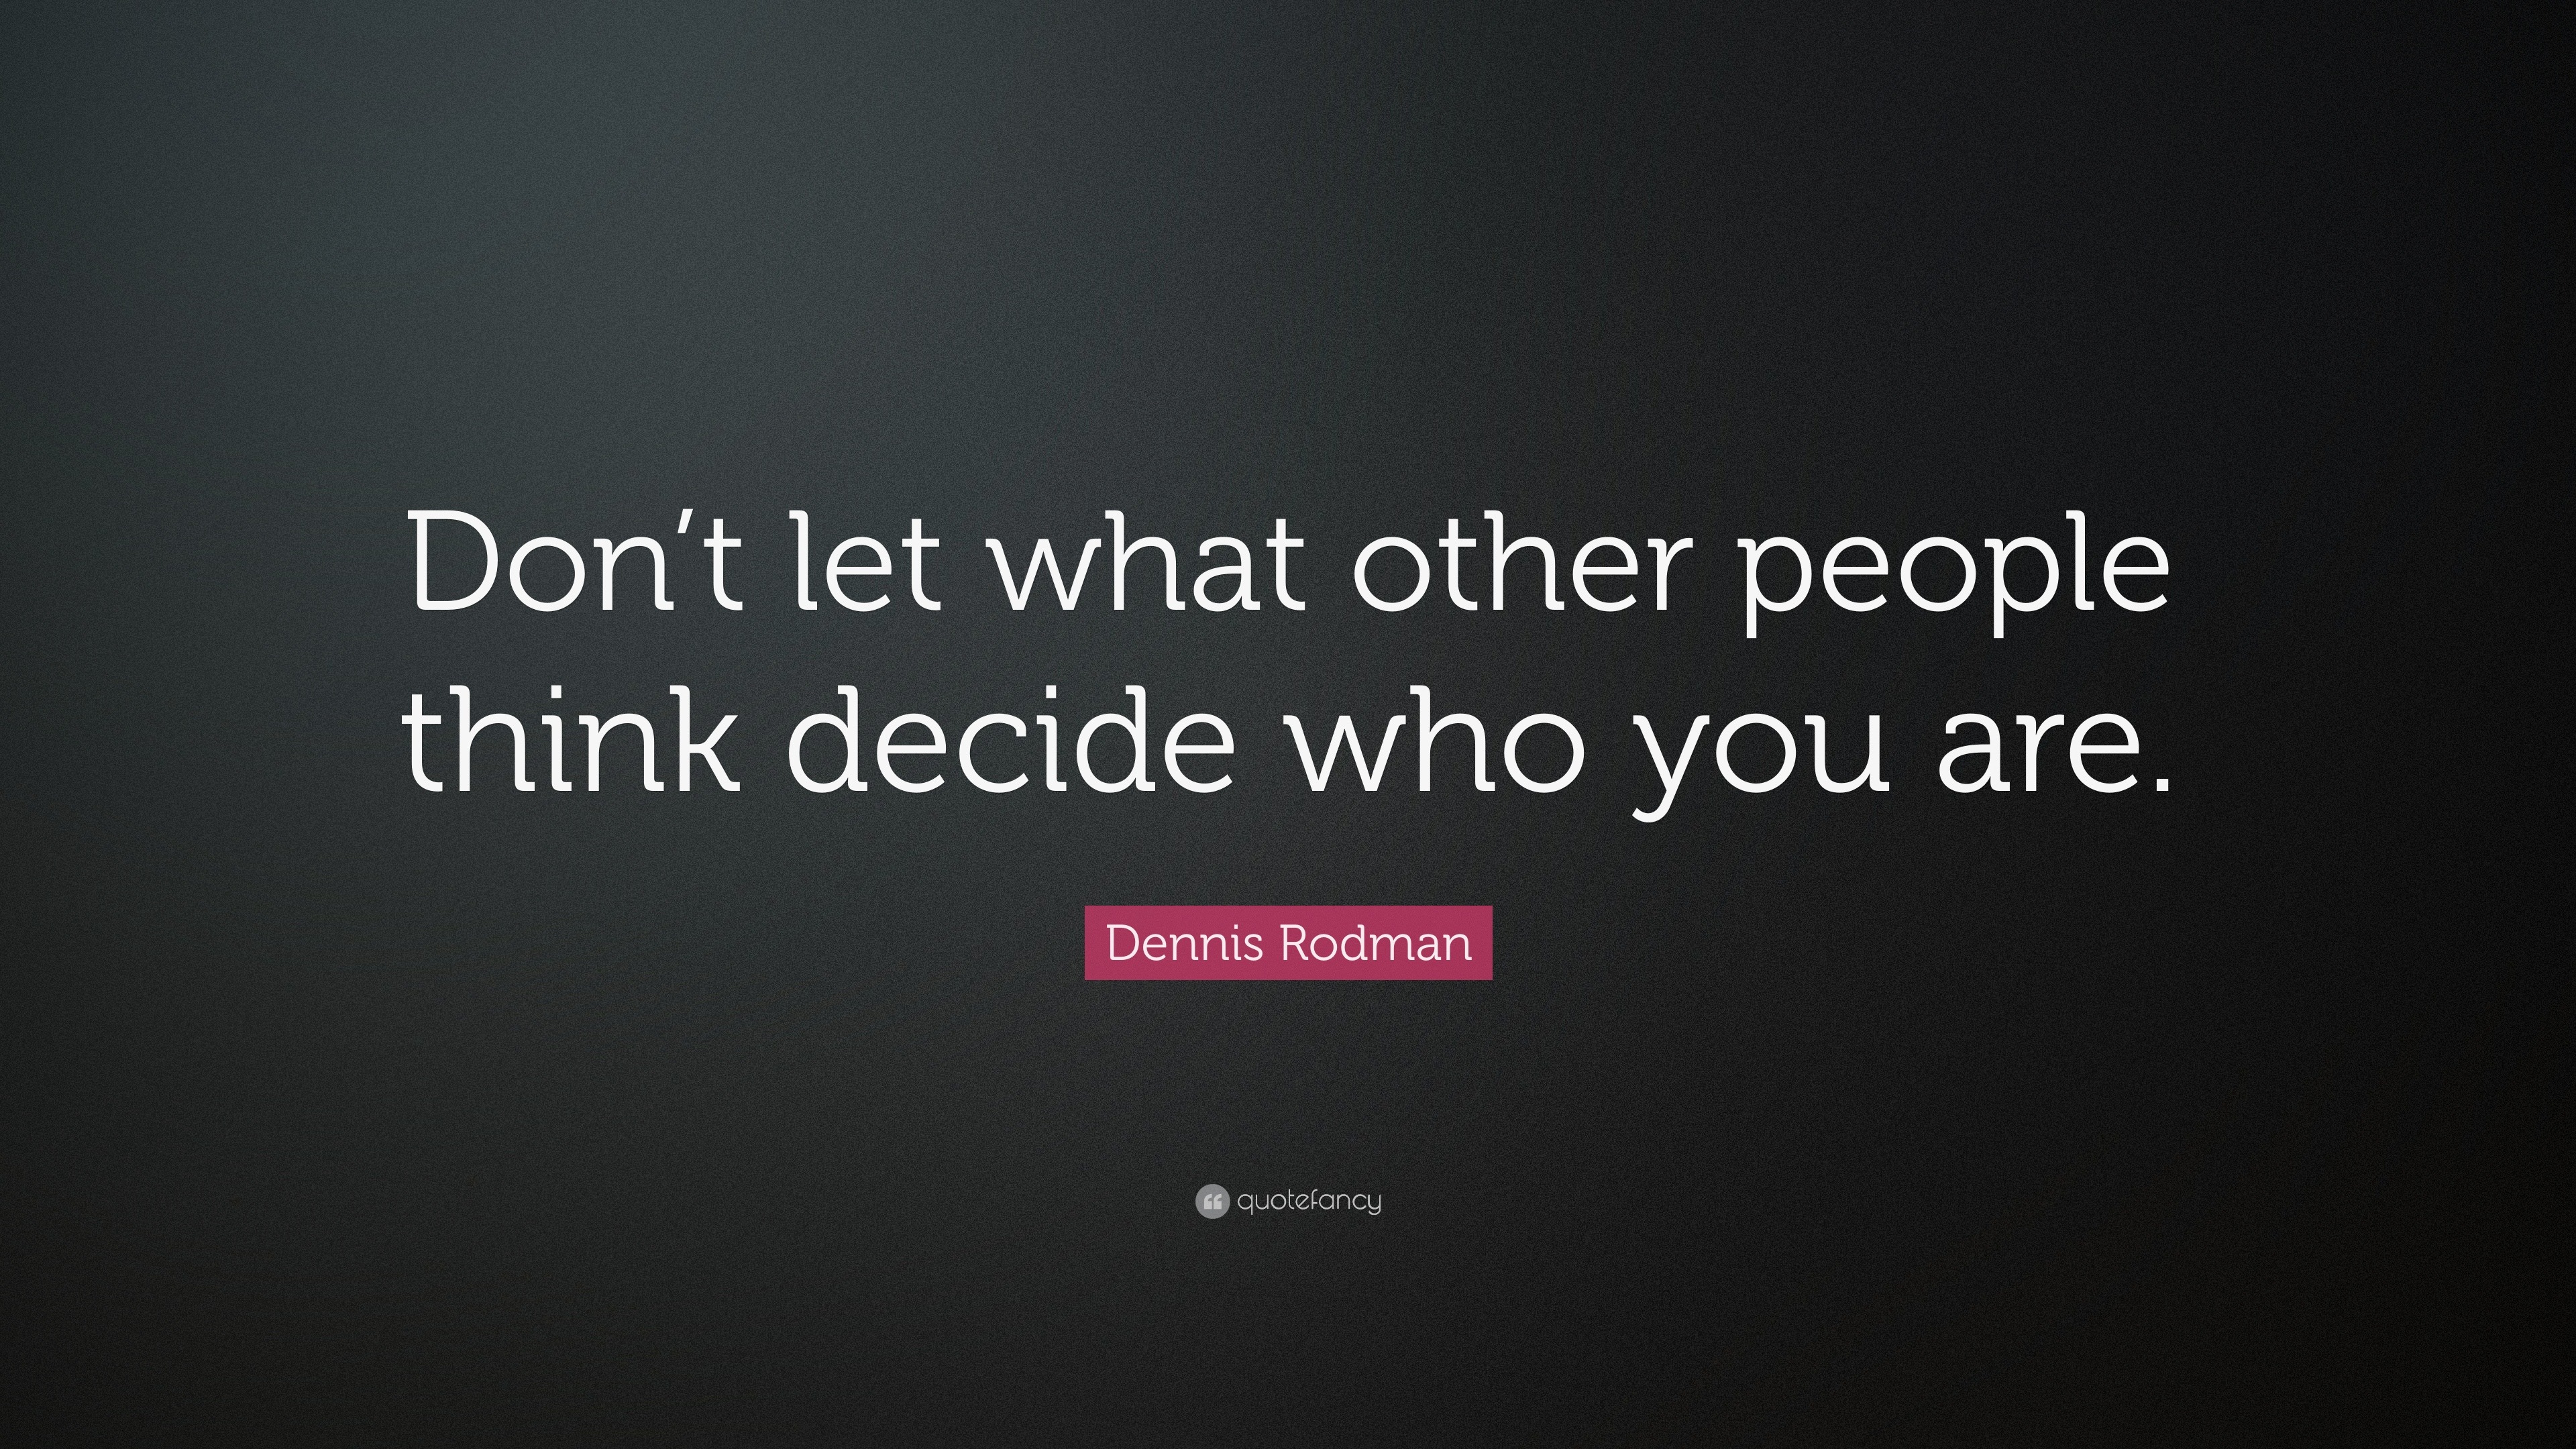 Dennis Rodman Quote: “Don’t let what other people think decide who you ...